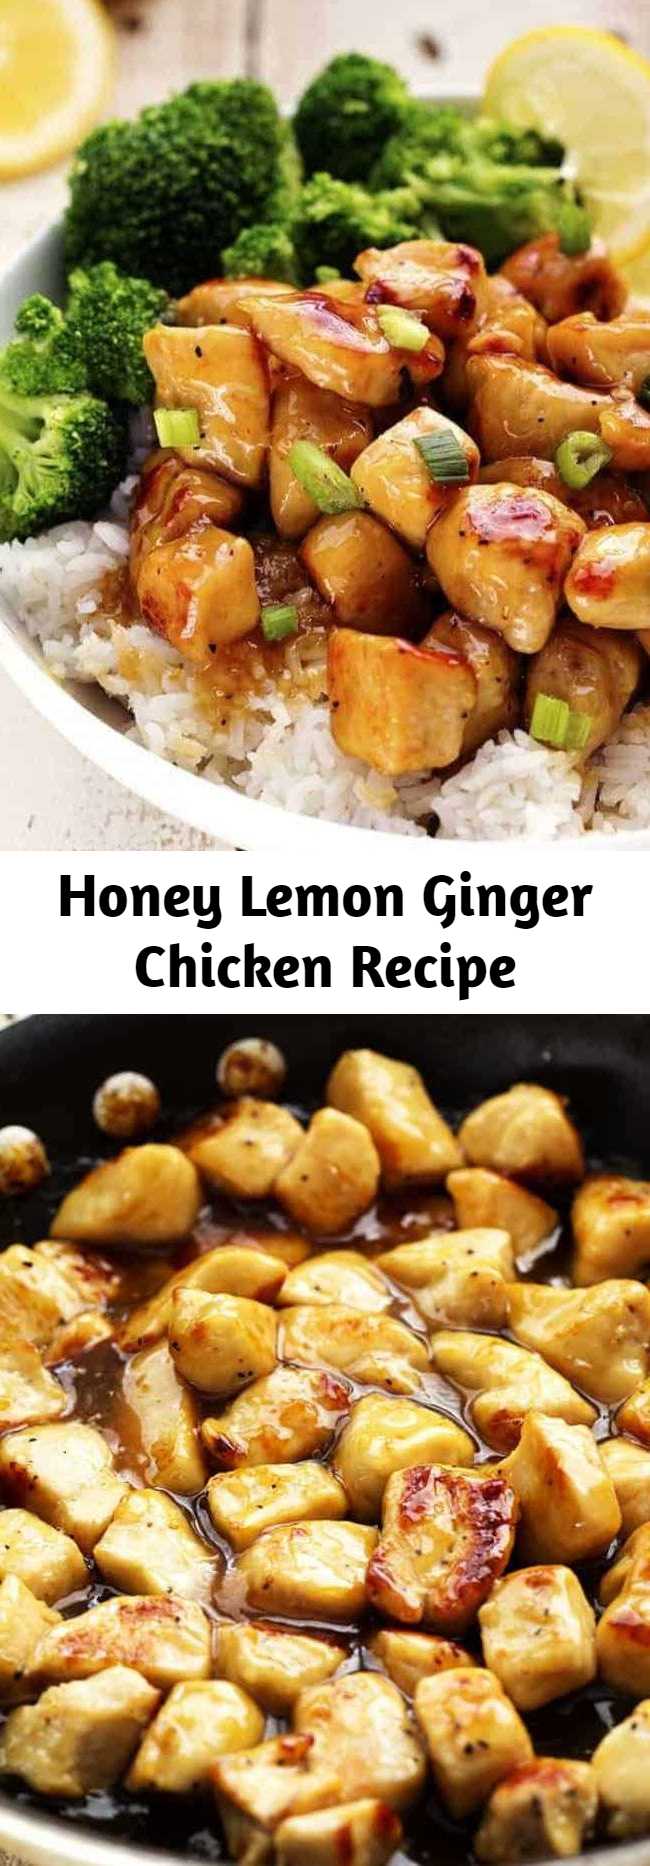 Honey Lemon Ginger Chicken Recipe - A light and delicious meal that is full of amazing honey lemon ginger flavor that the family will love!